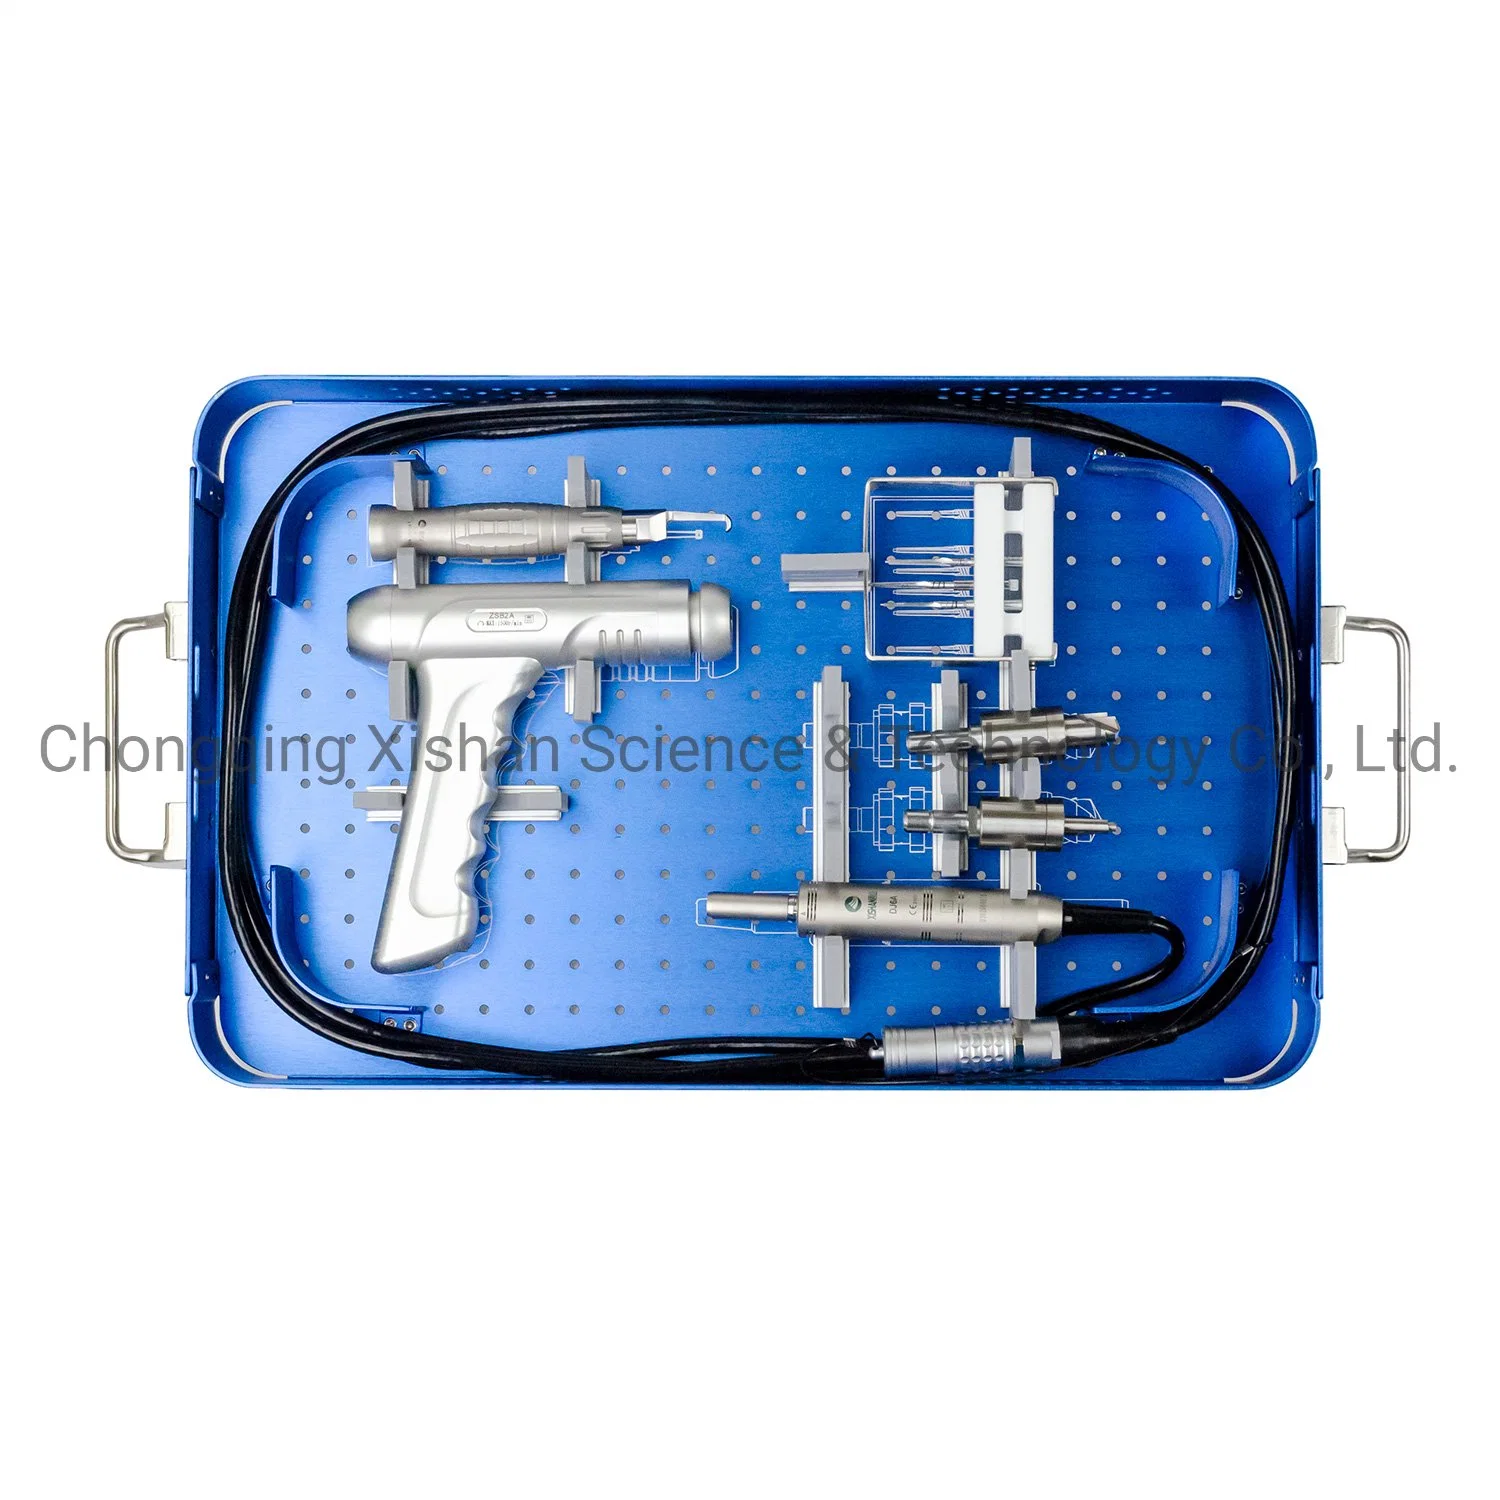 Skull Bone /Cutting Guard/ Surgical Power Tools /High Speed Drill Set/Perforator